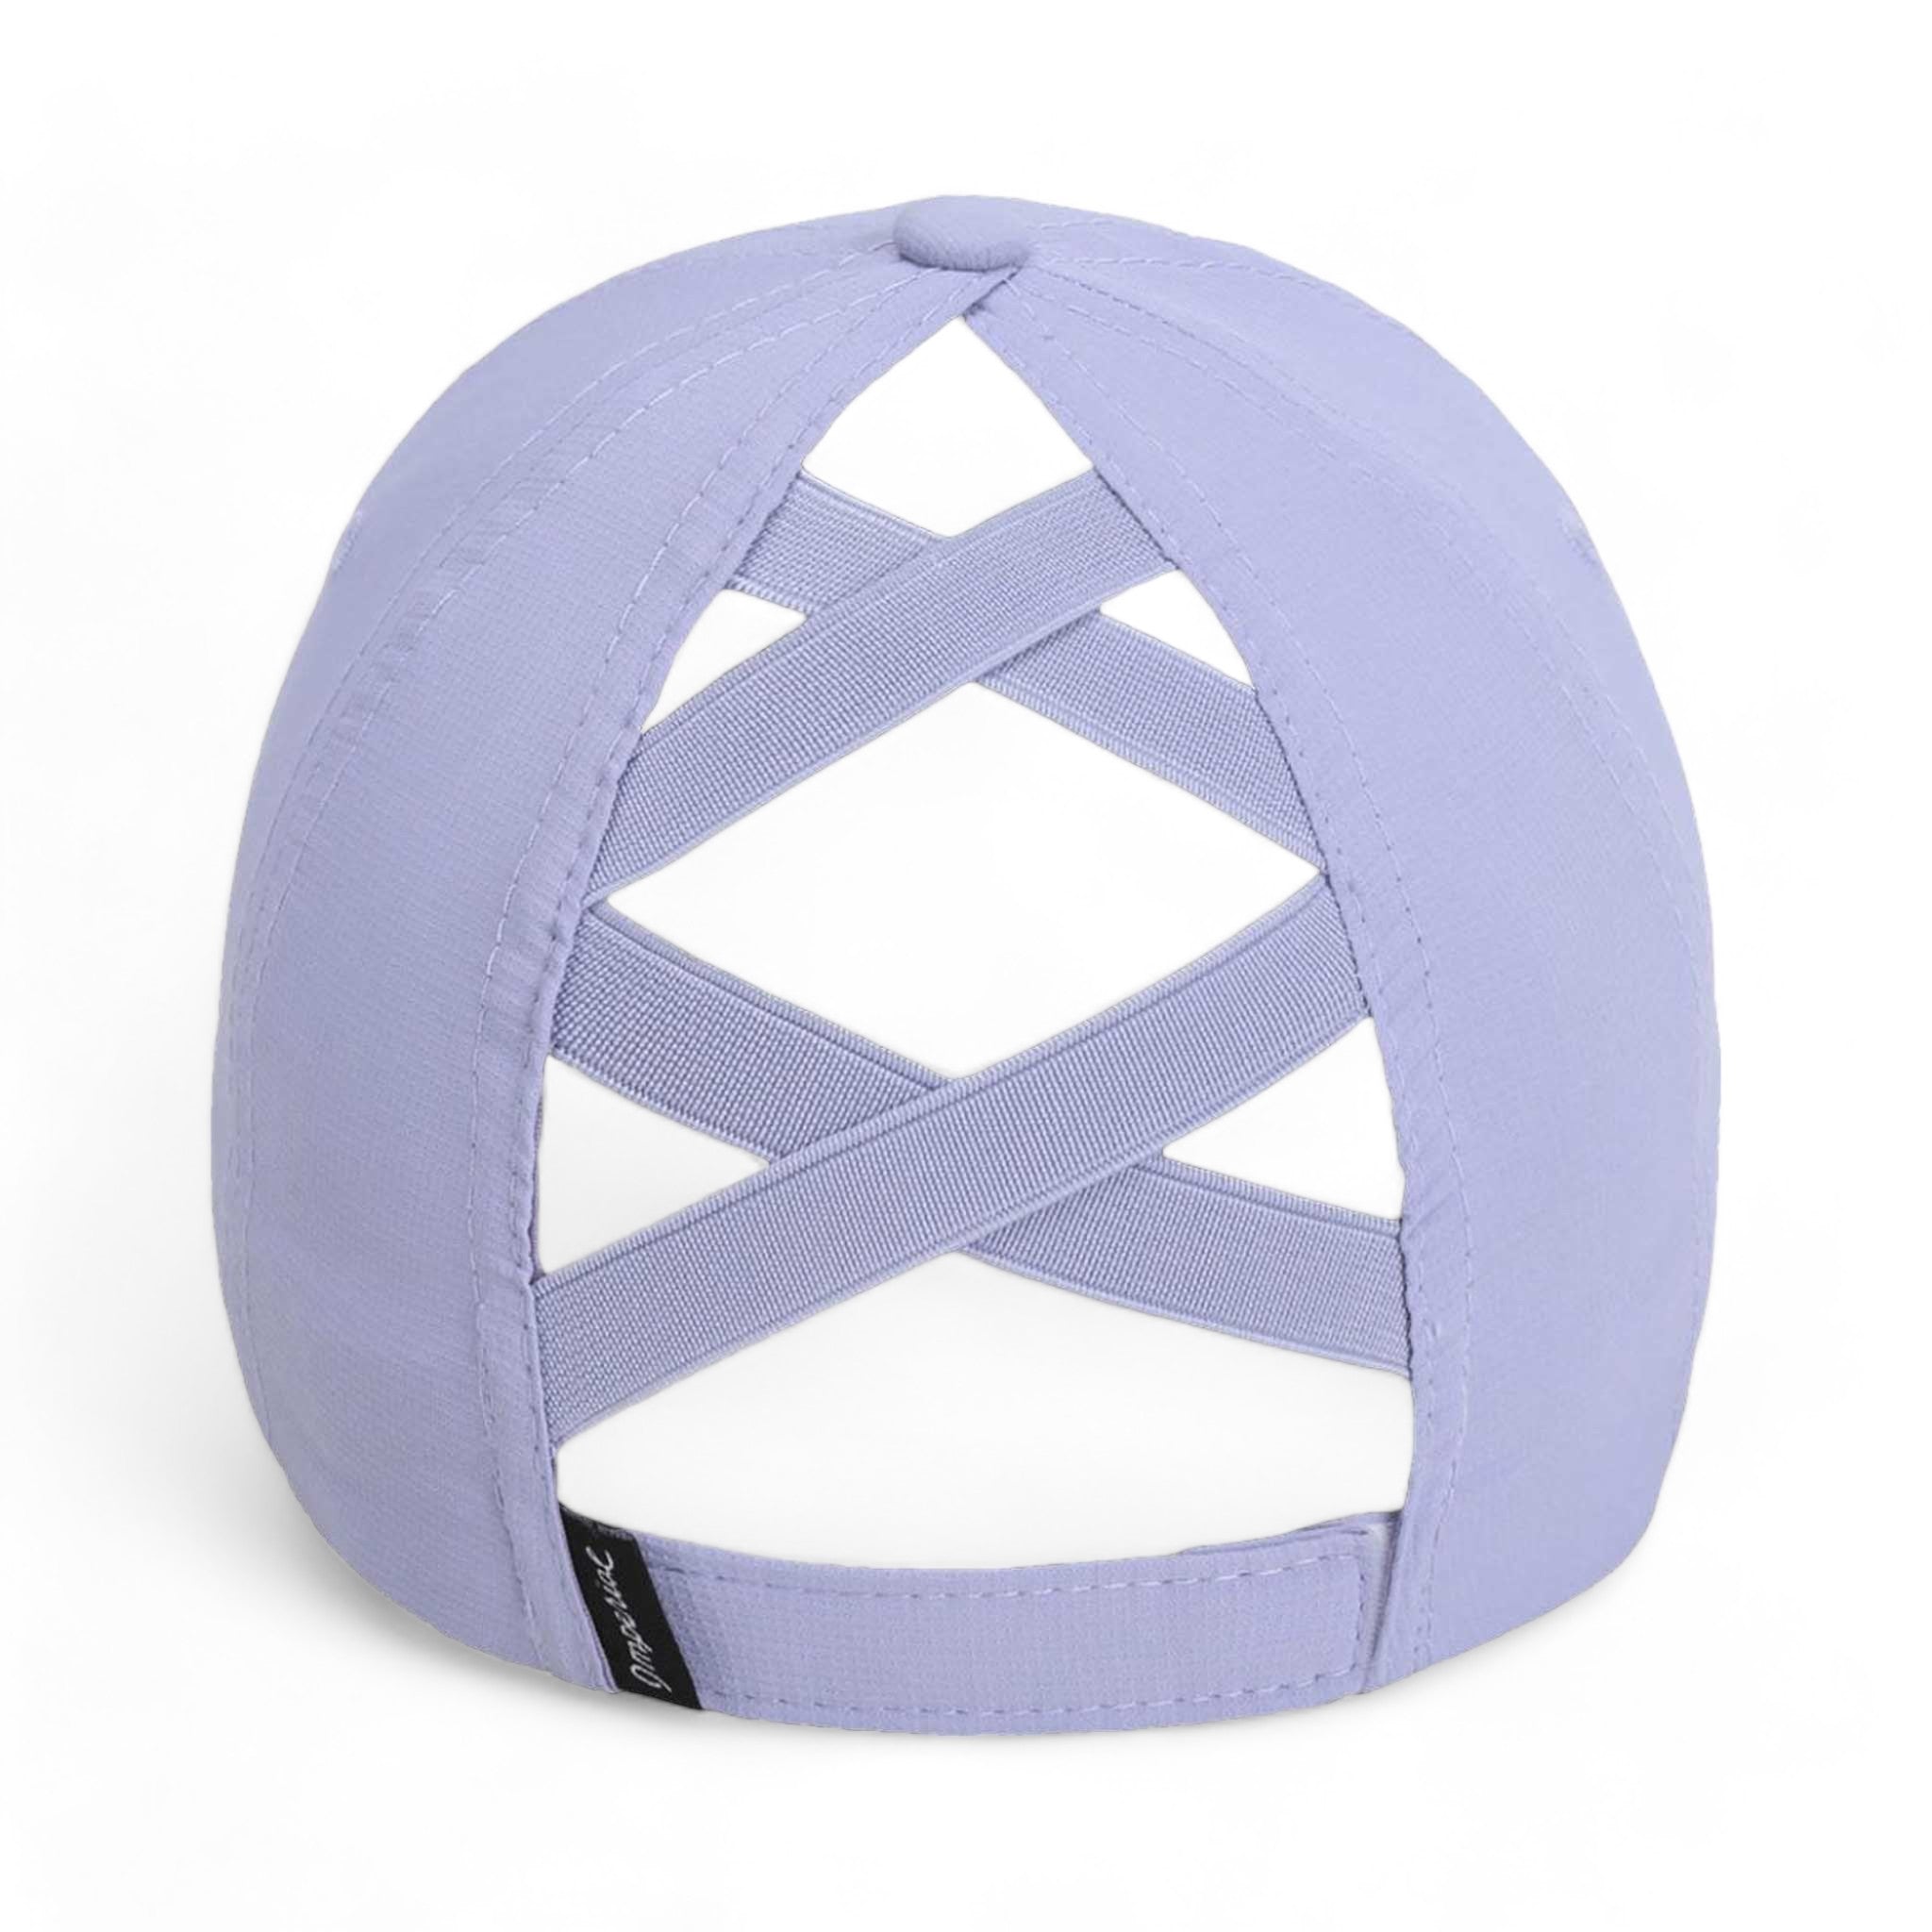 Back view of Imperial L338 custom hat in lavender